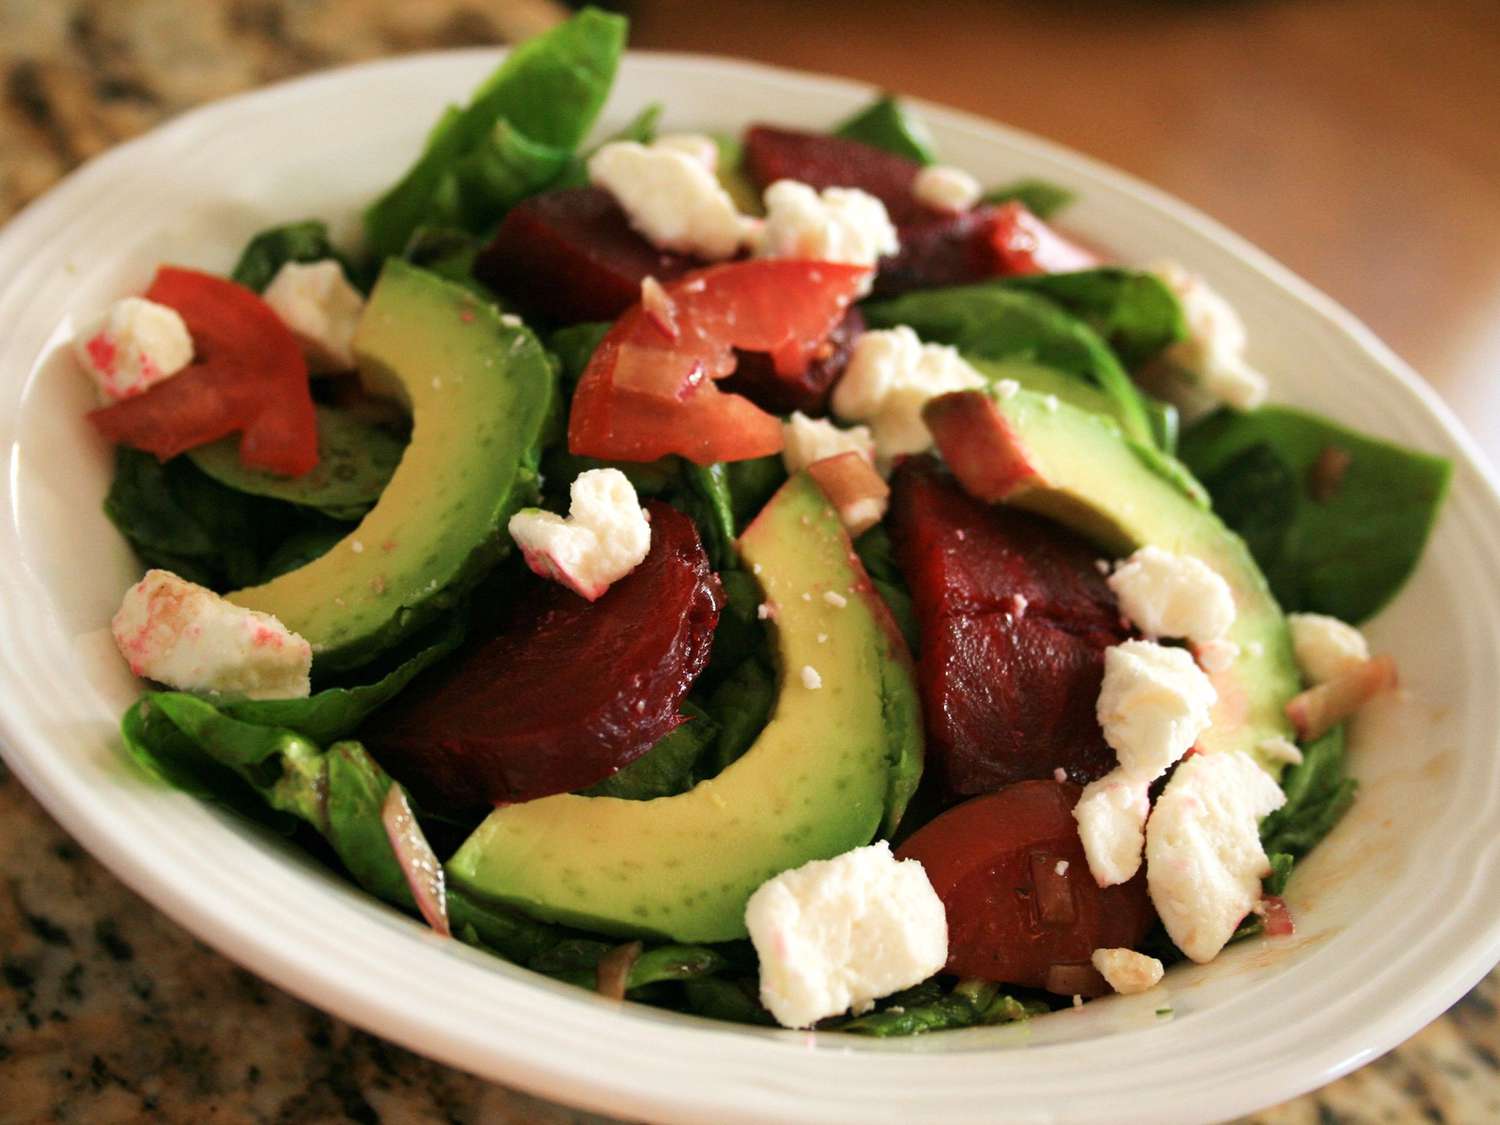 close up view of Beet Salad with avocado, cheese, lettuce and tomato on a platter